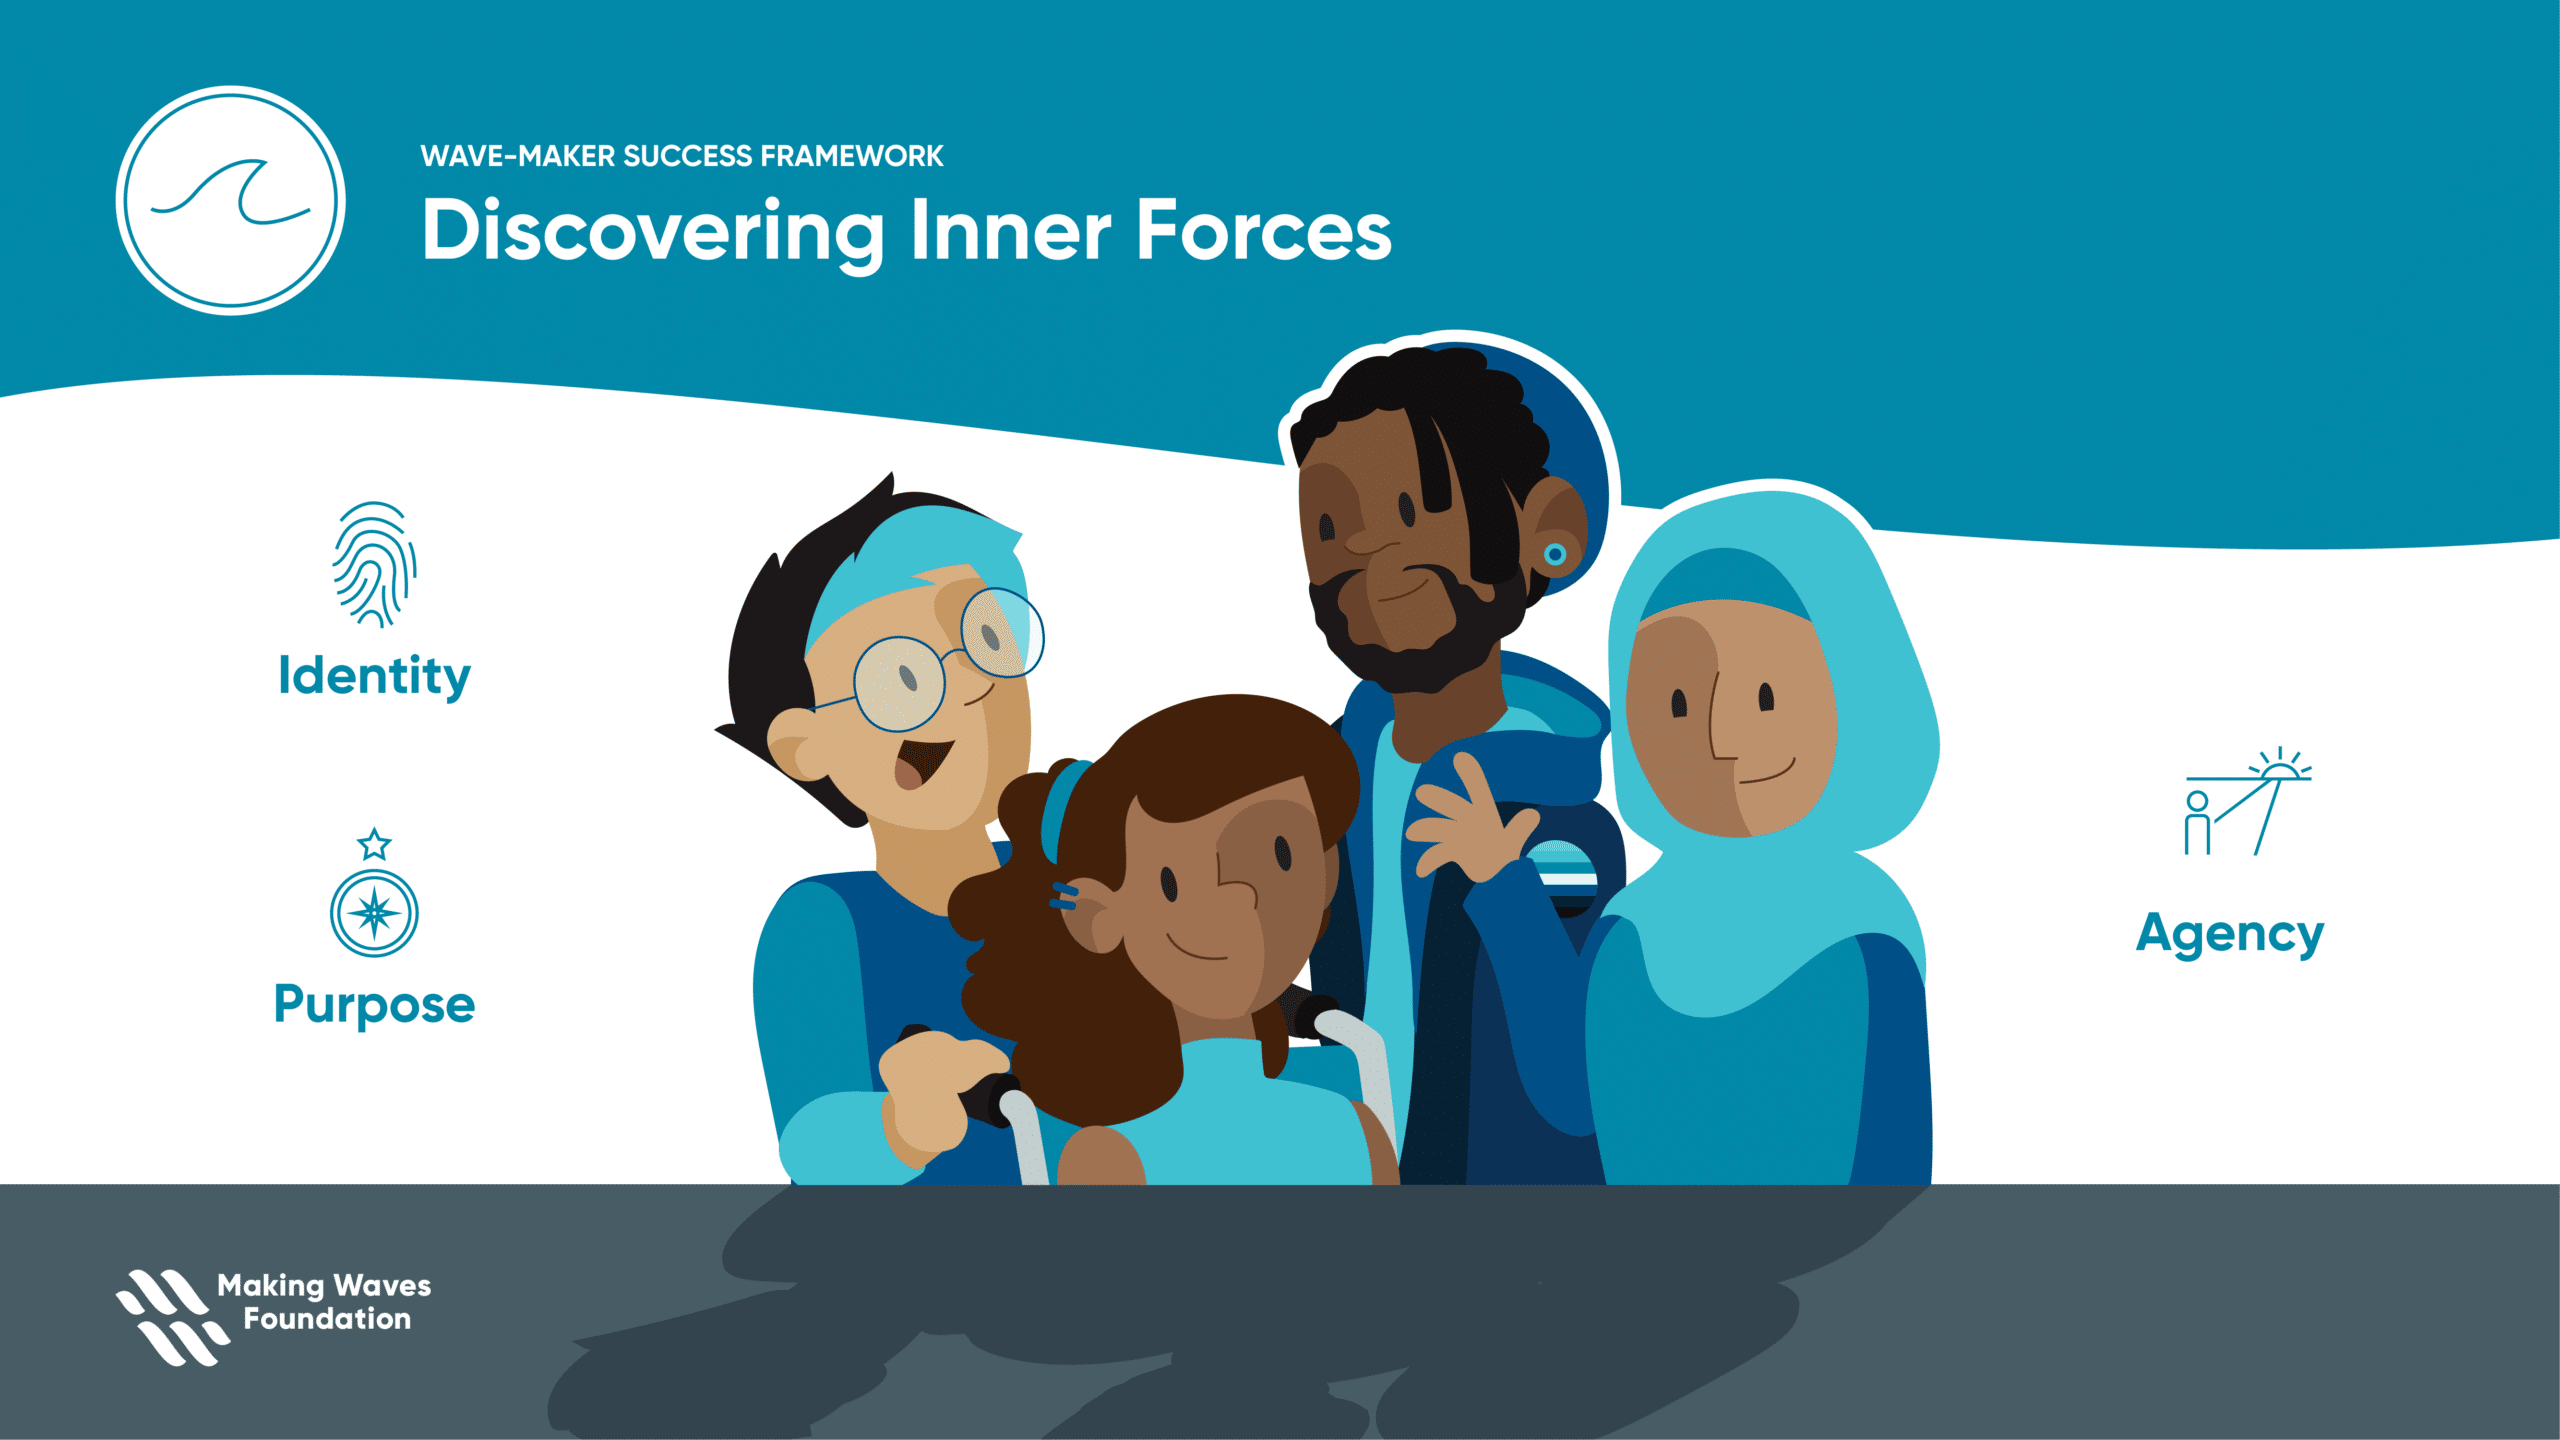 Graphic with illustrations of four people with text and icons for Identity, Purpose, and Agency under Discovering Inner Forces